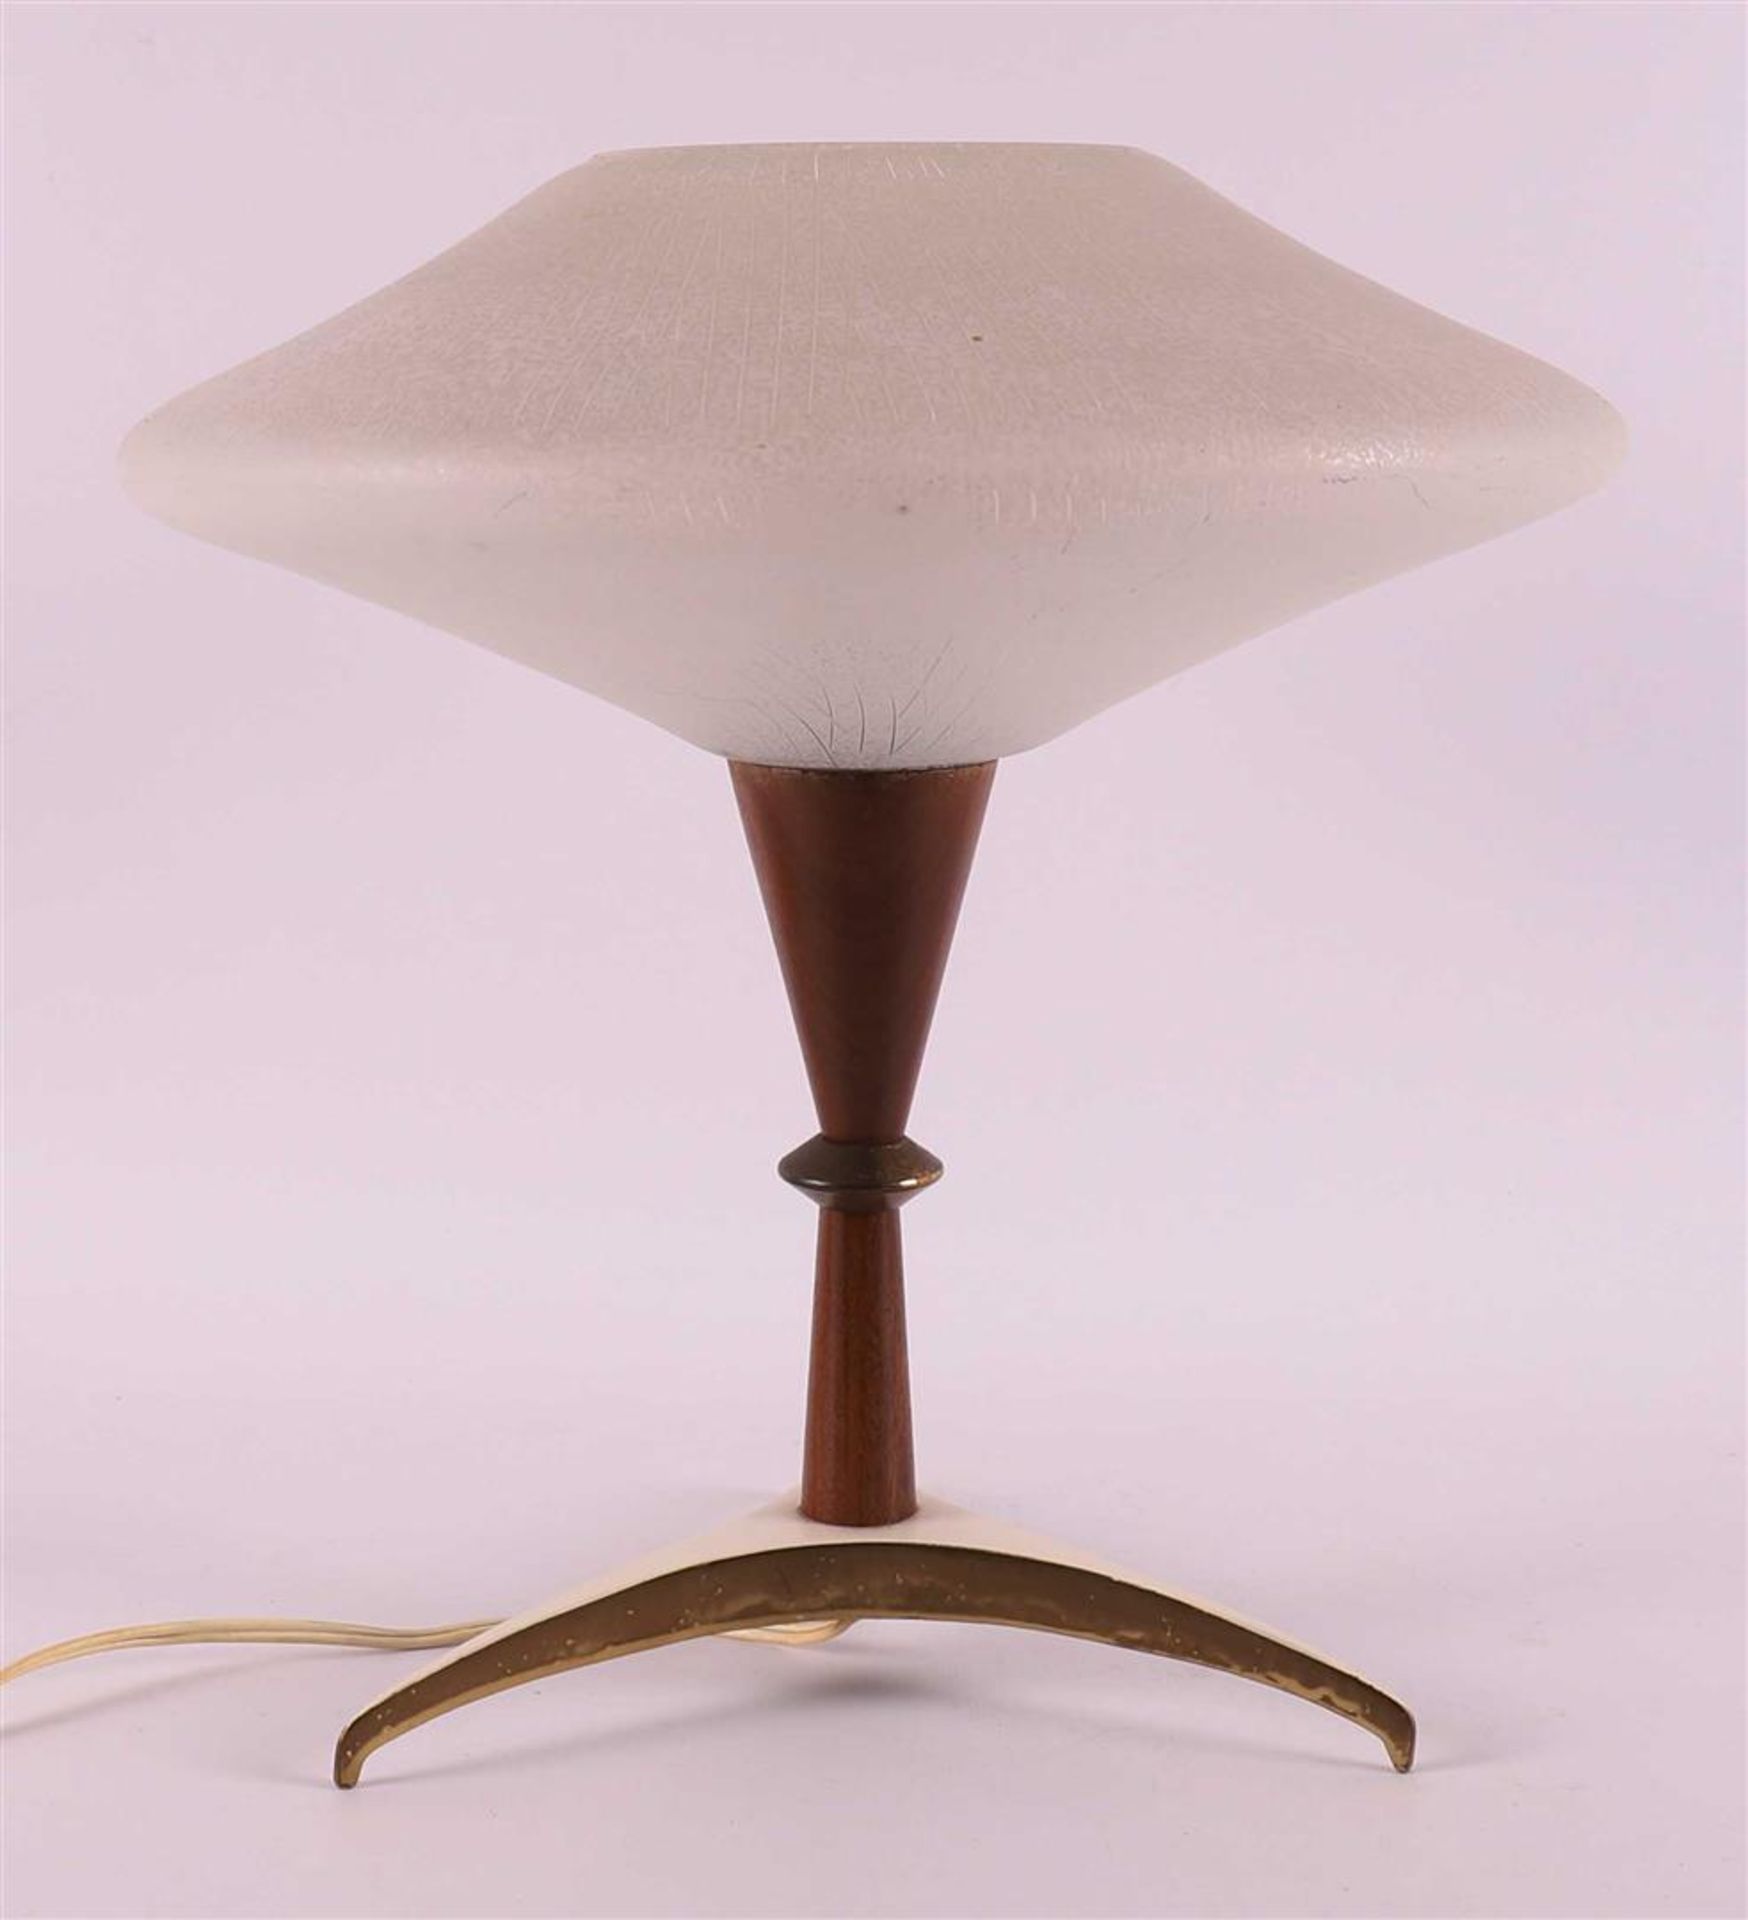 A vintage design table lamp with satin glass shade, 1950s. - Image 2 of 3